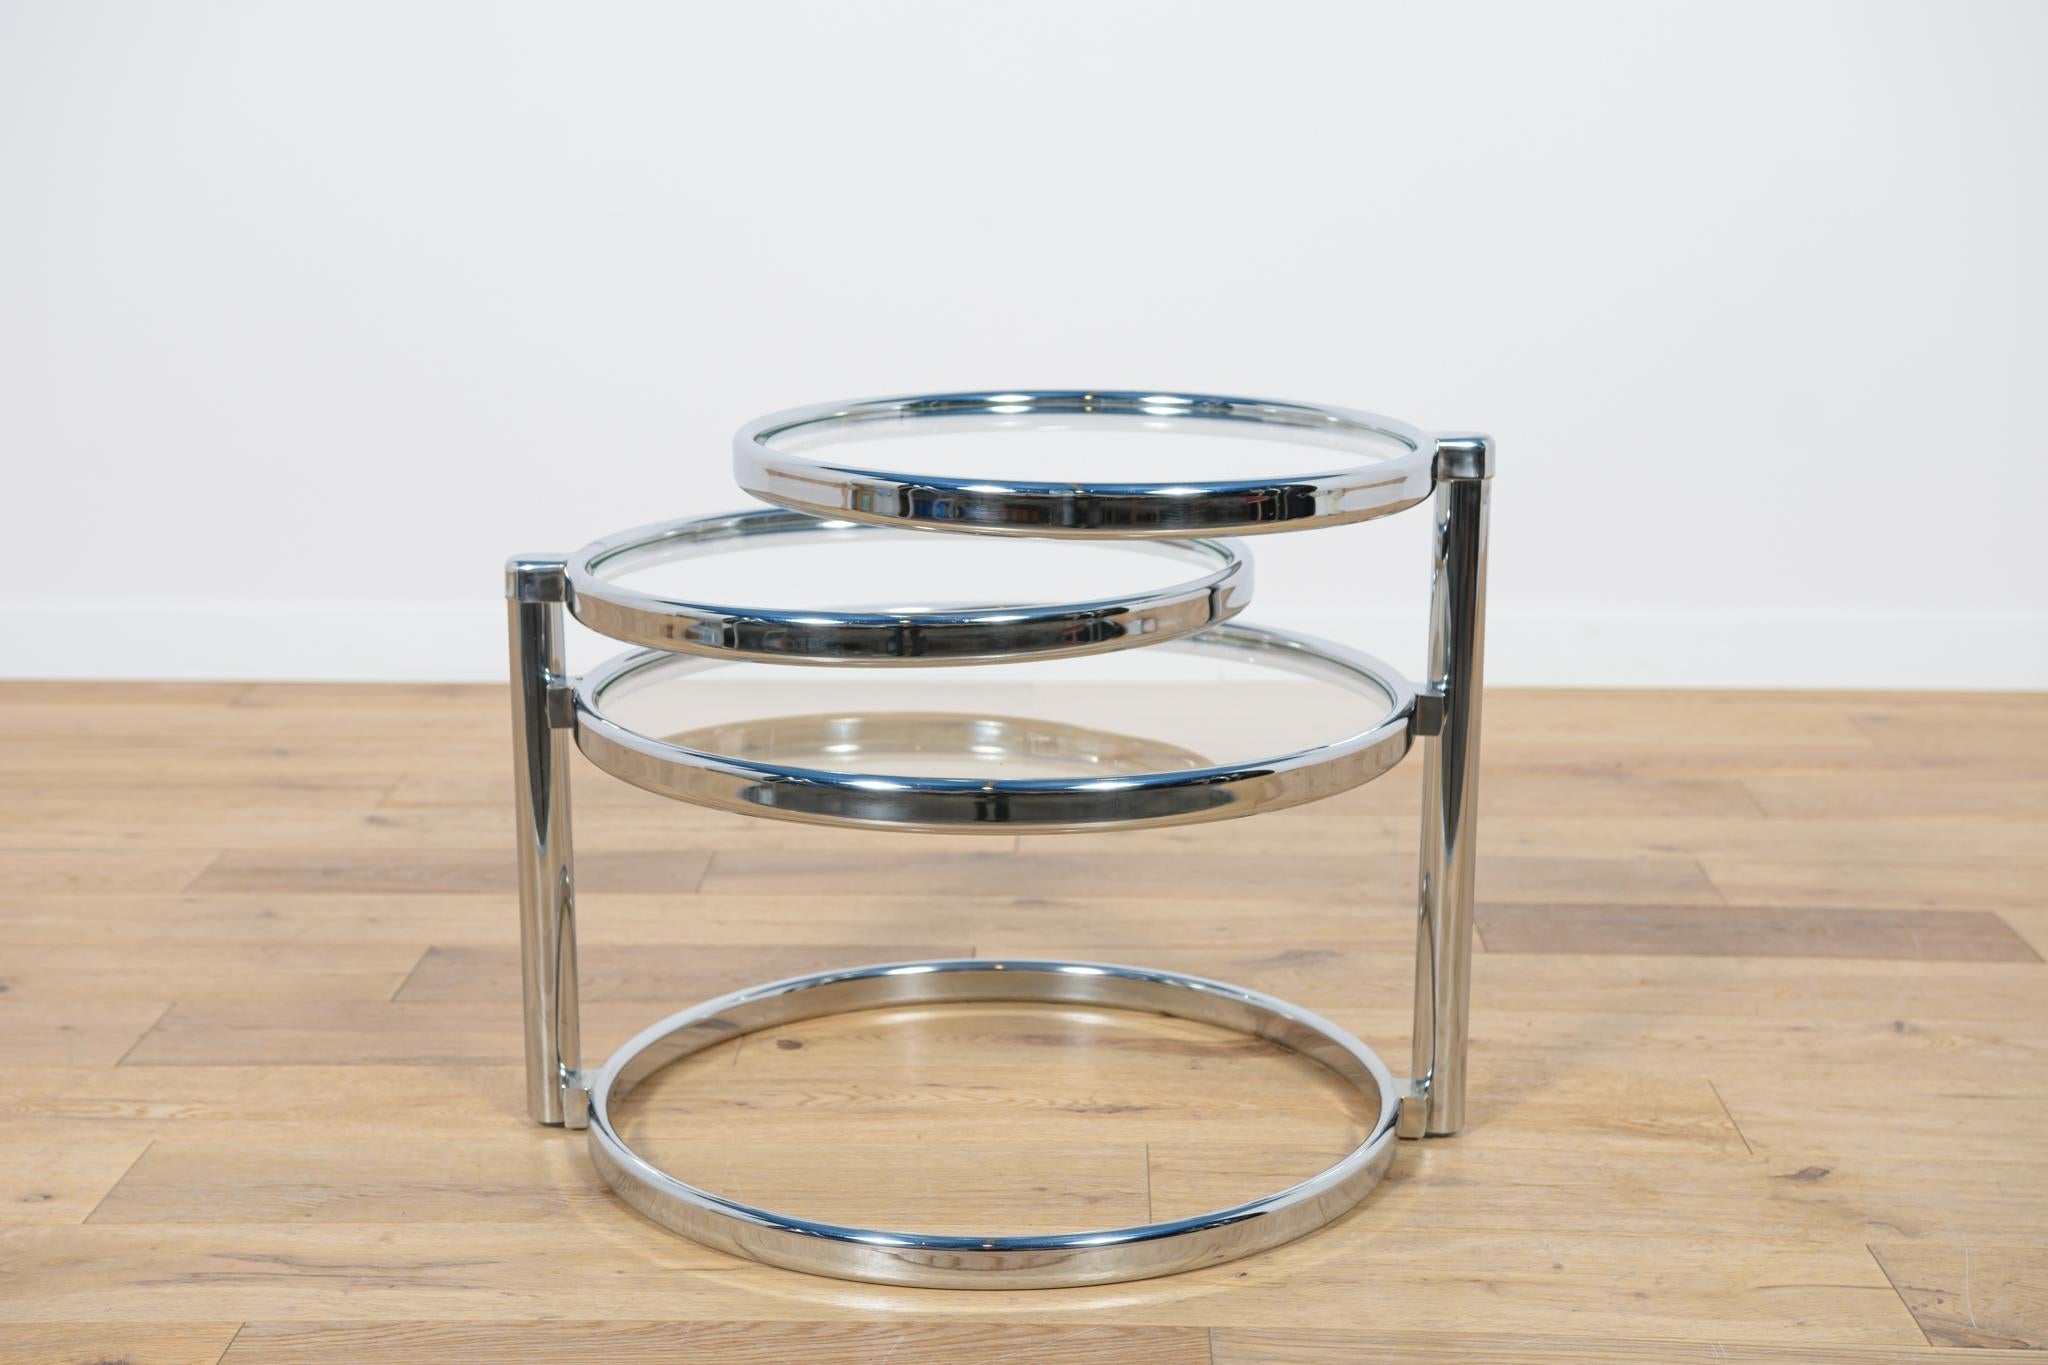 A table designed by Milo Baughman in the United States in the 1970s. A unique design made of chrome-plated metal. A frame consisting of three trays that can be extended from the central body using two side joints. The chrome elements have been